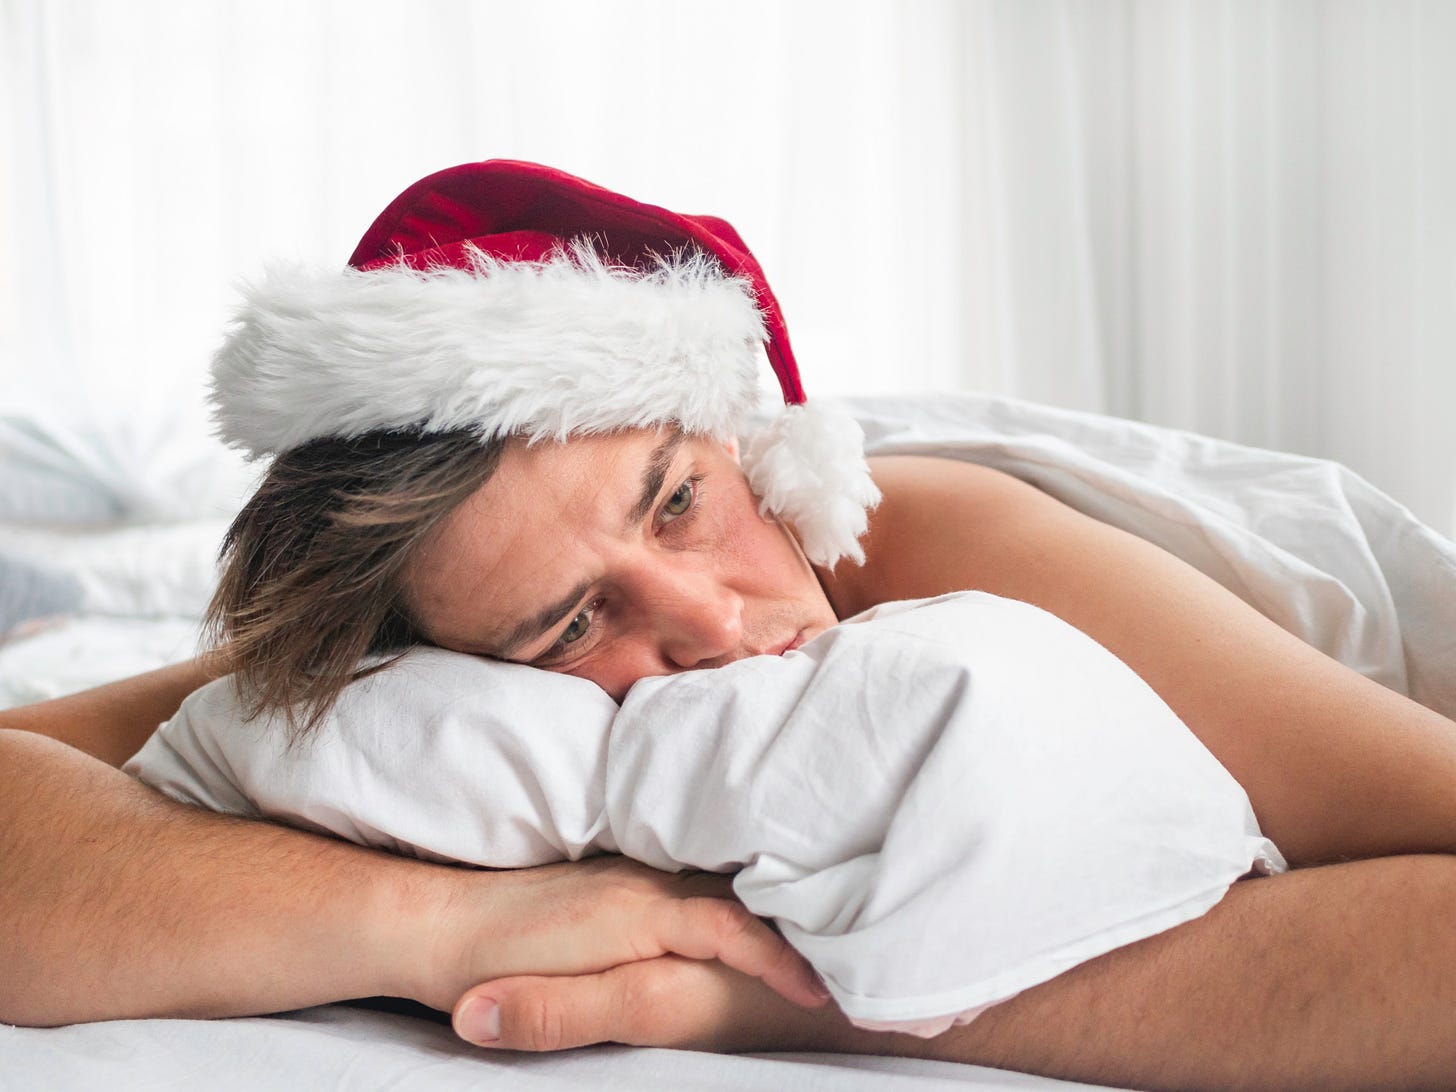 A sad man in a santa hat hugs his pillow and stares into the distance.